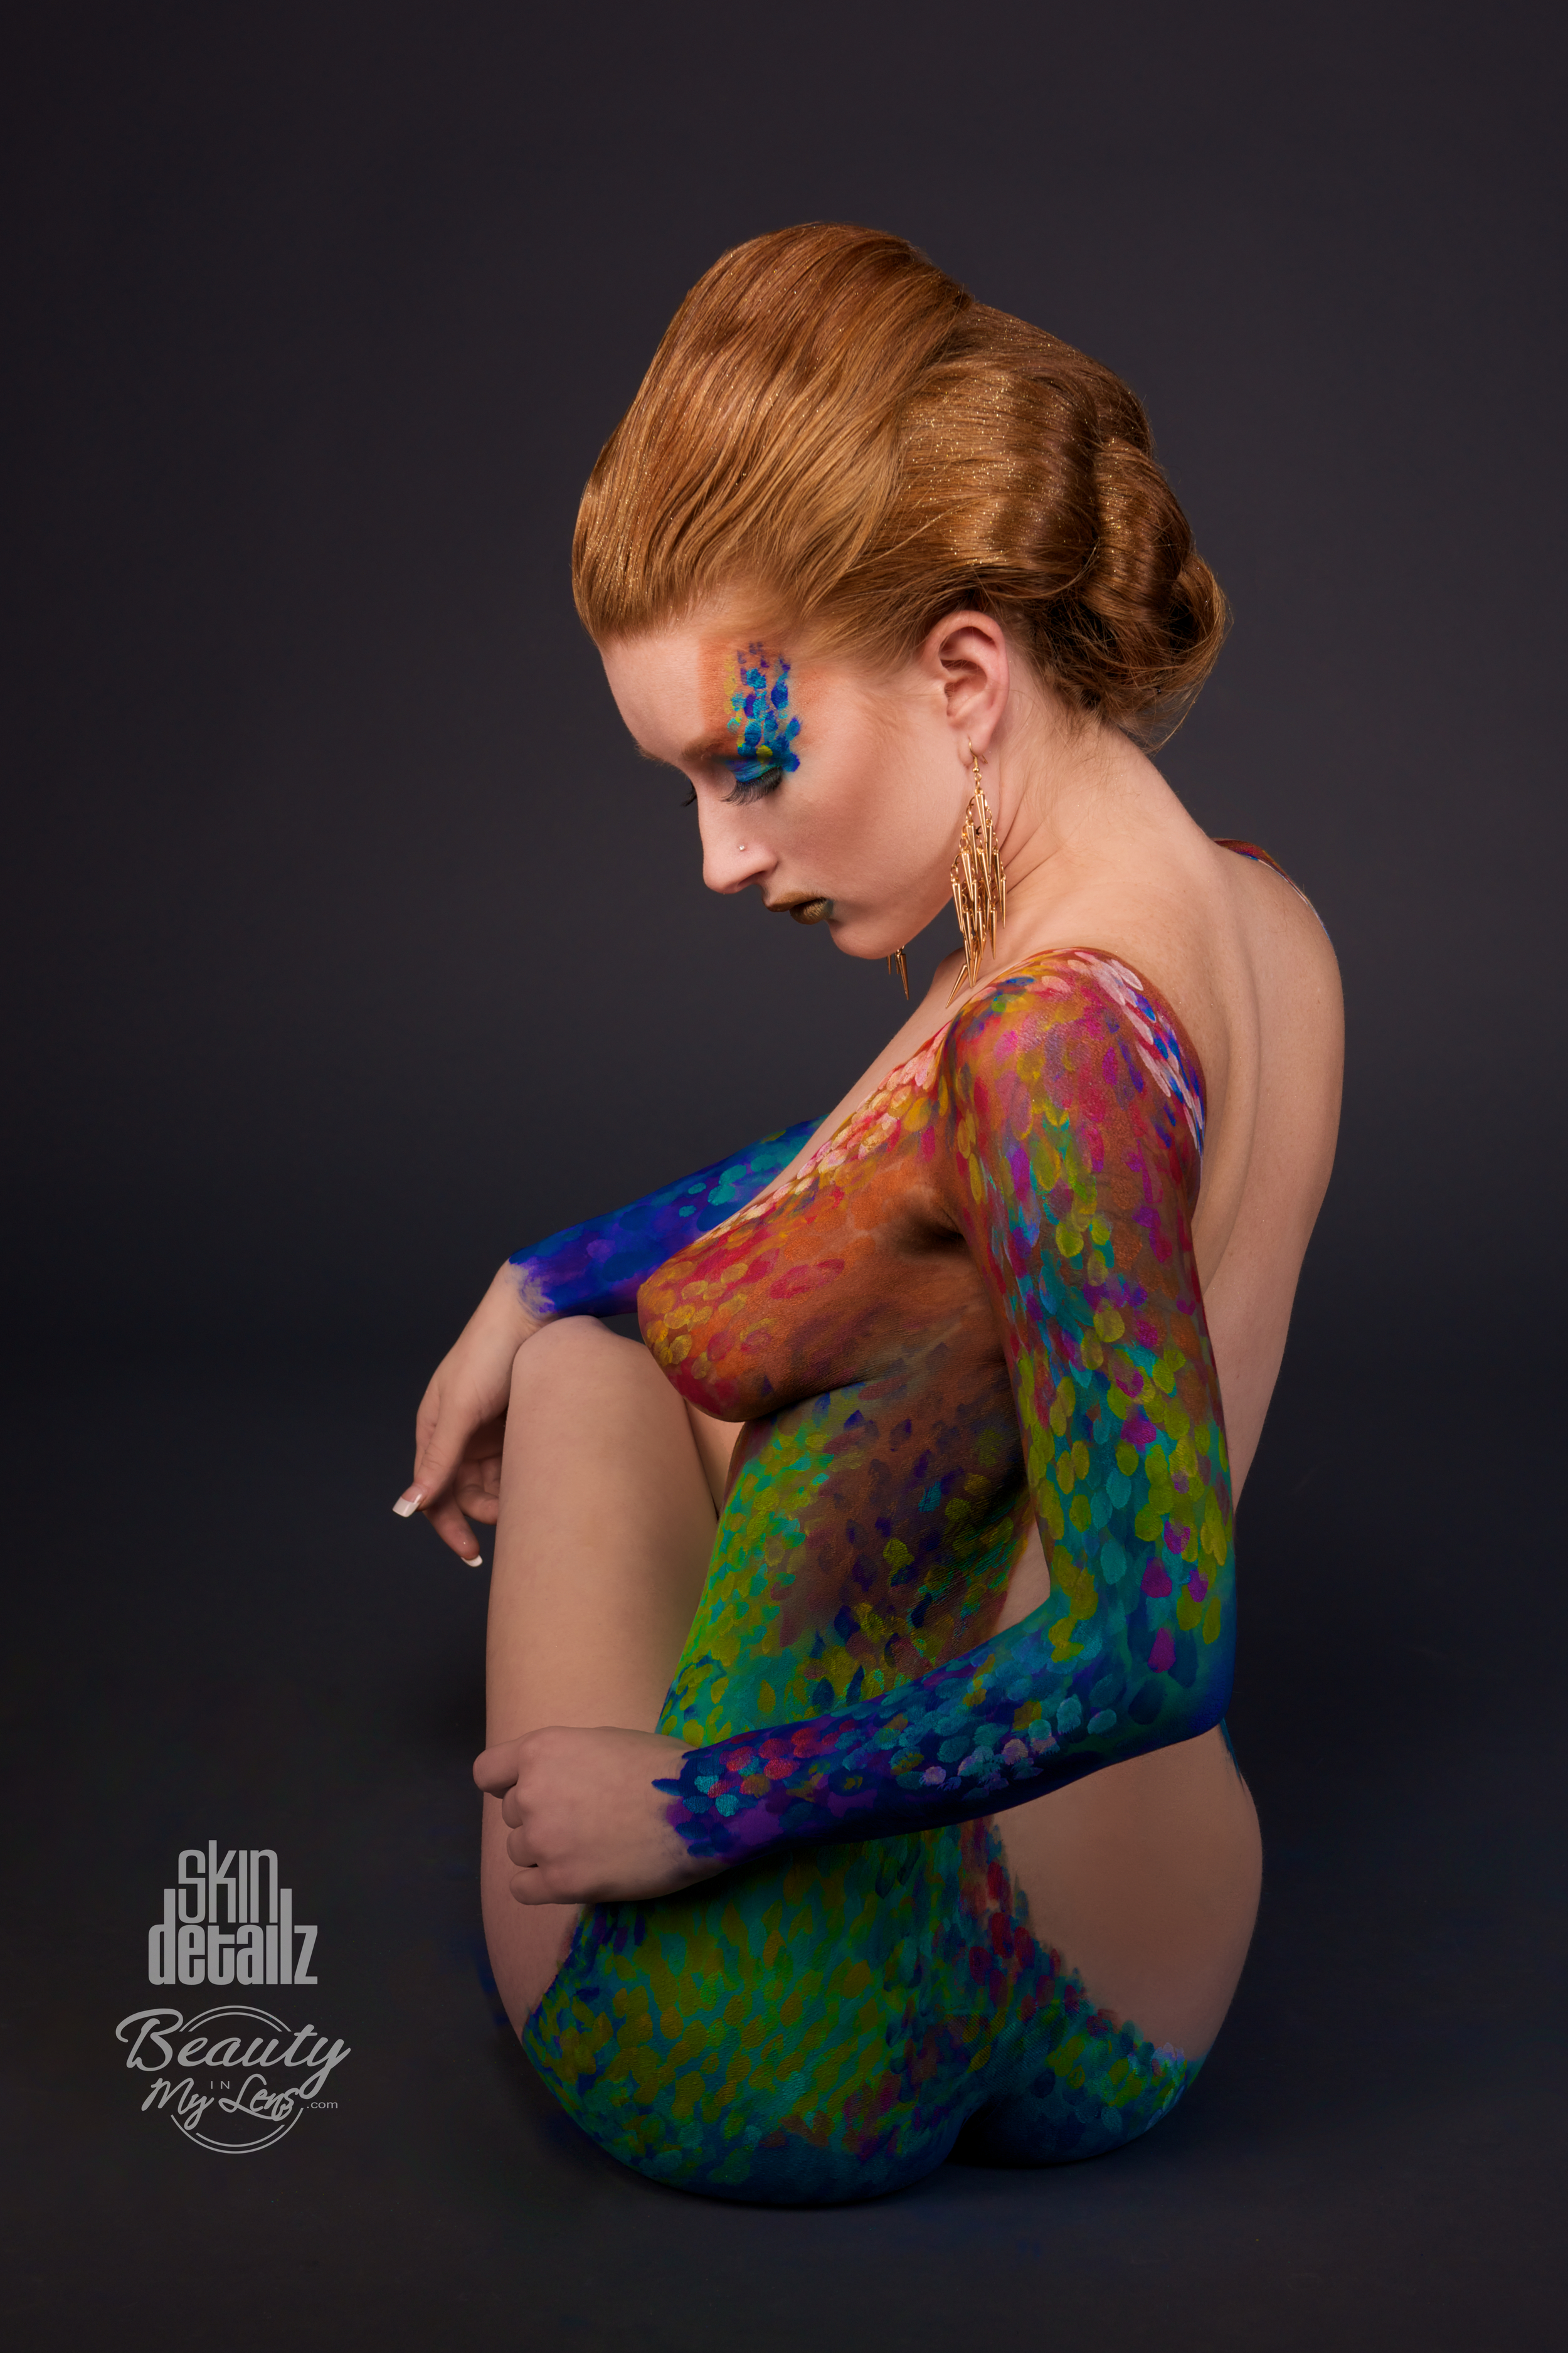 Face and Body Painting — SkinDetailz